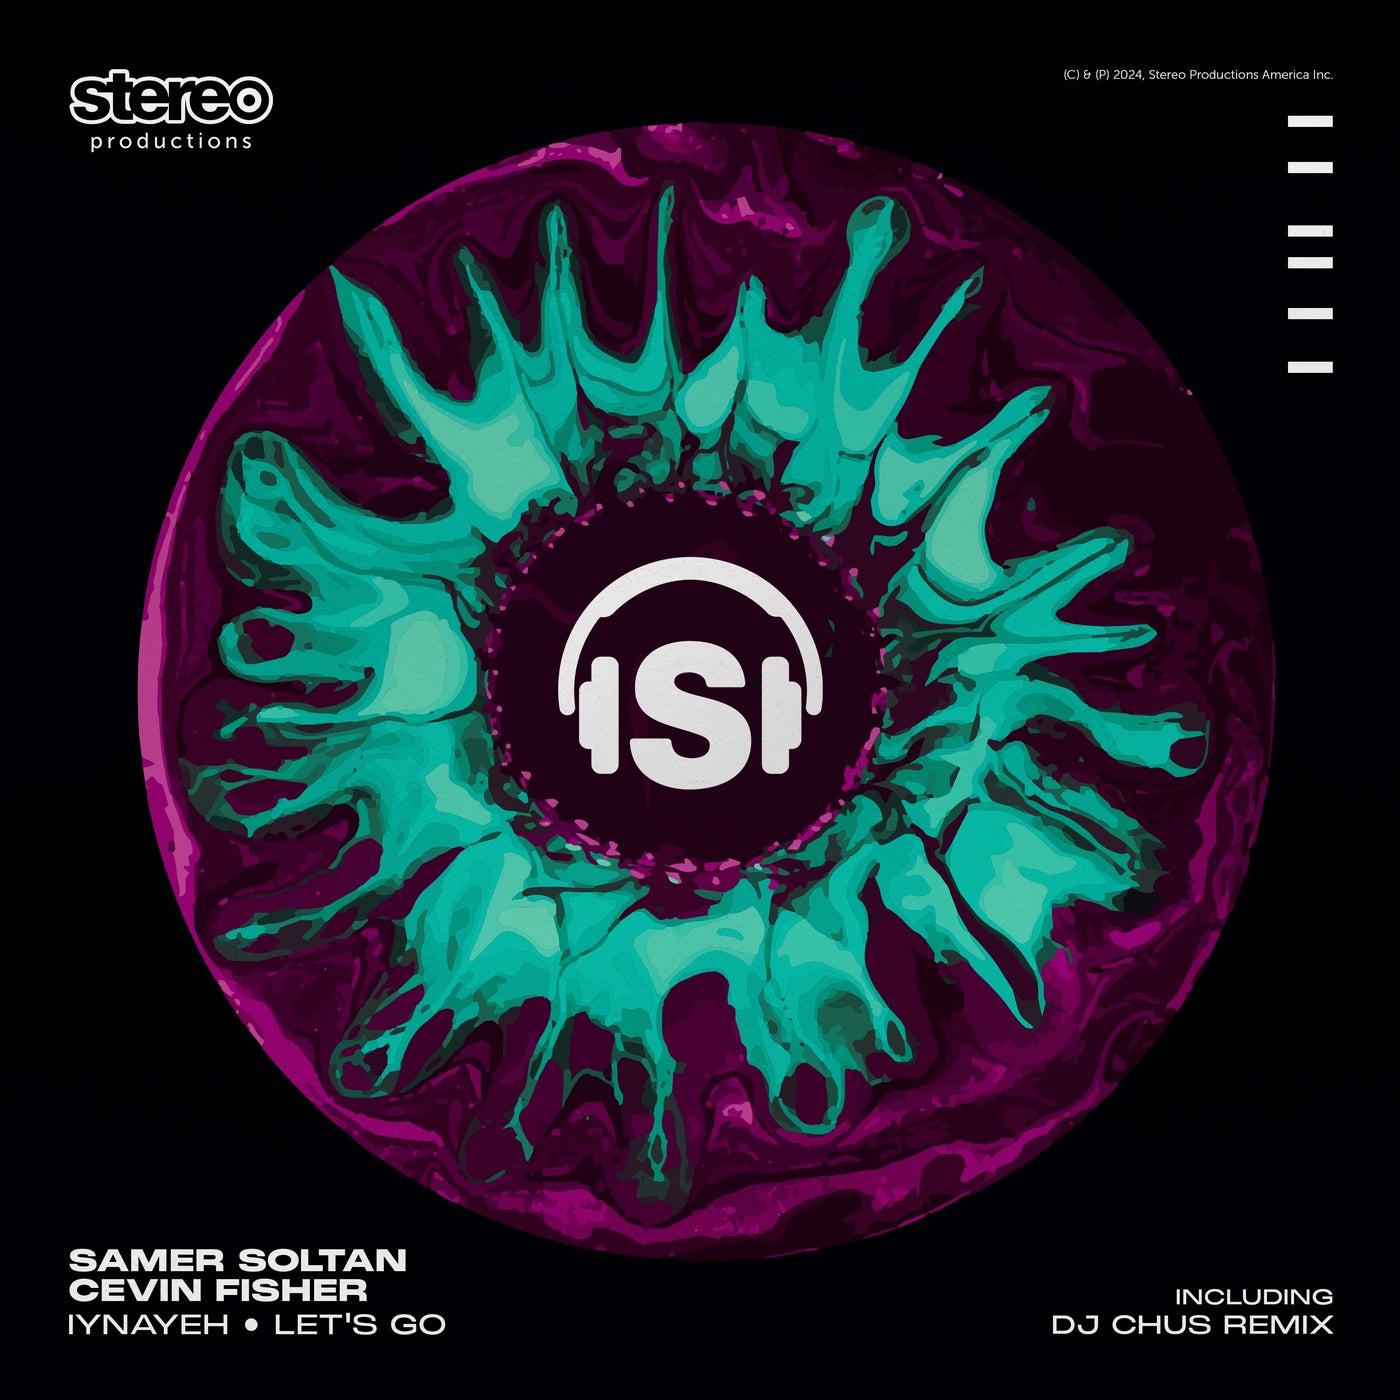 image cover: Cevin Fisher, Samer Soltan - Iynayeh on Stereo Productions